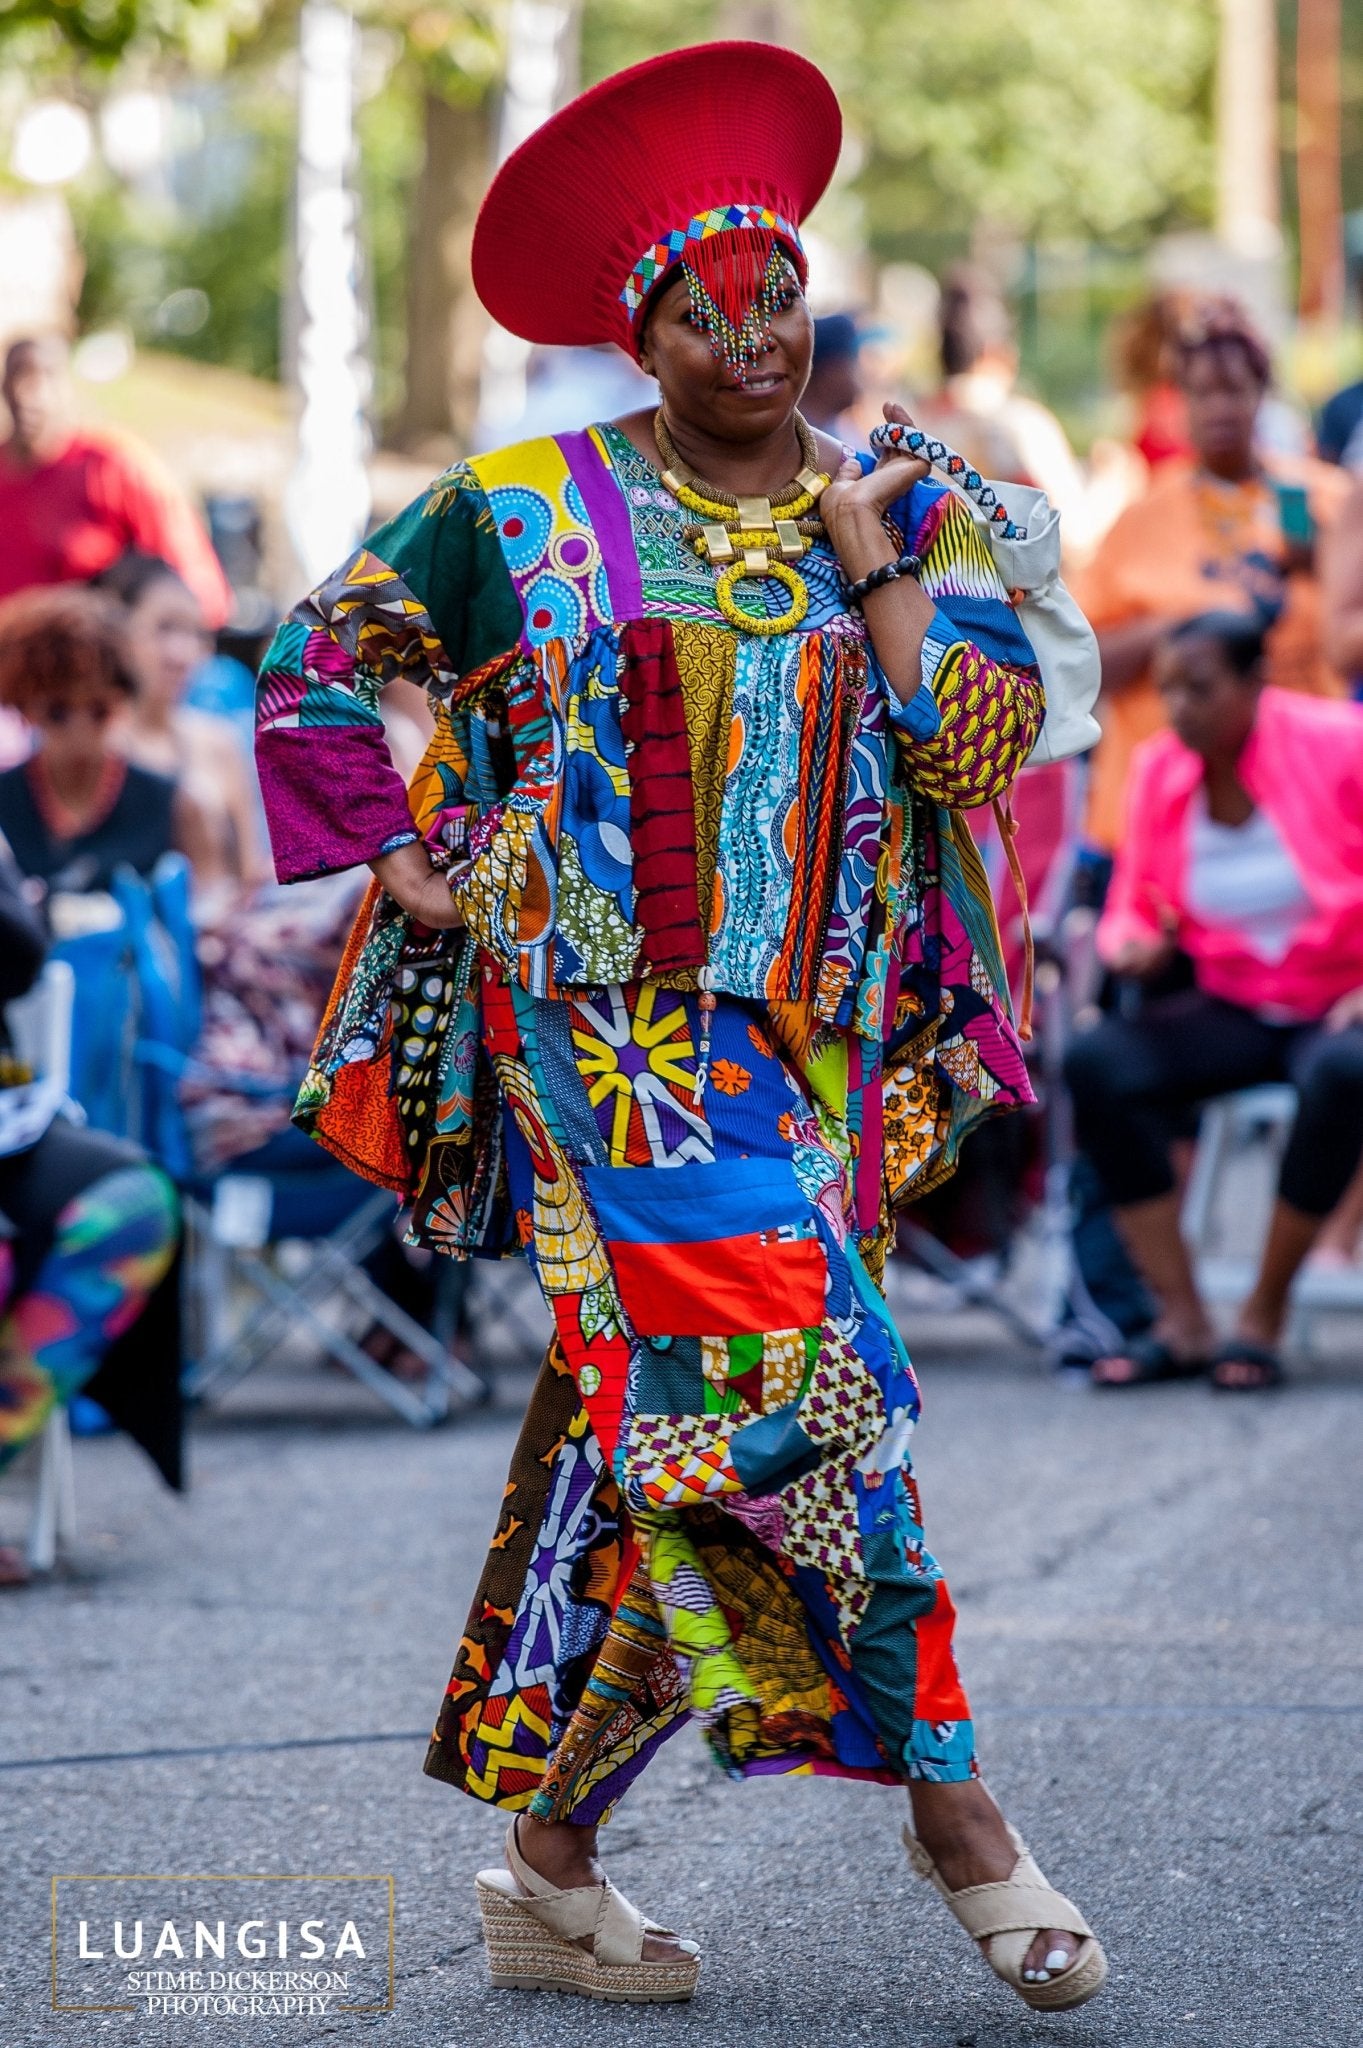 Things to See and Do at the Wakanda Celebration - Luangisa African Gallery